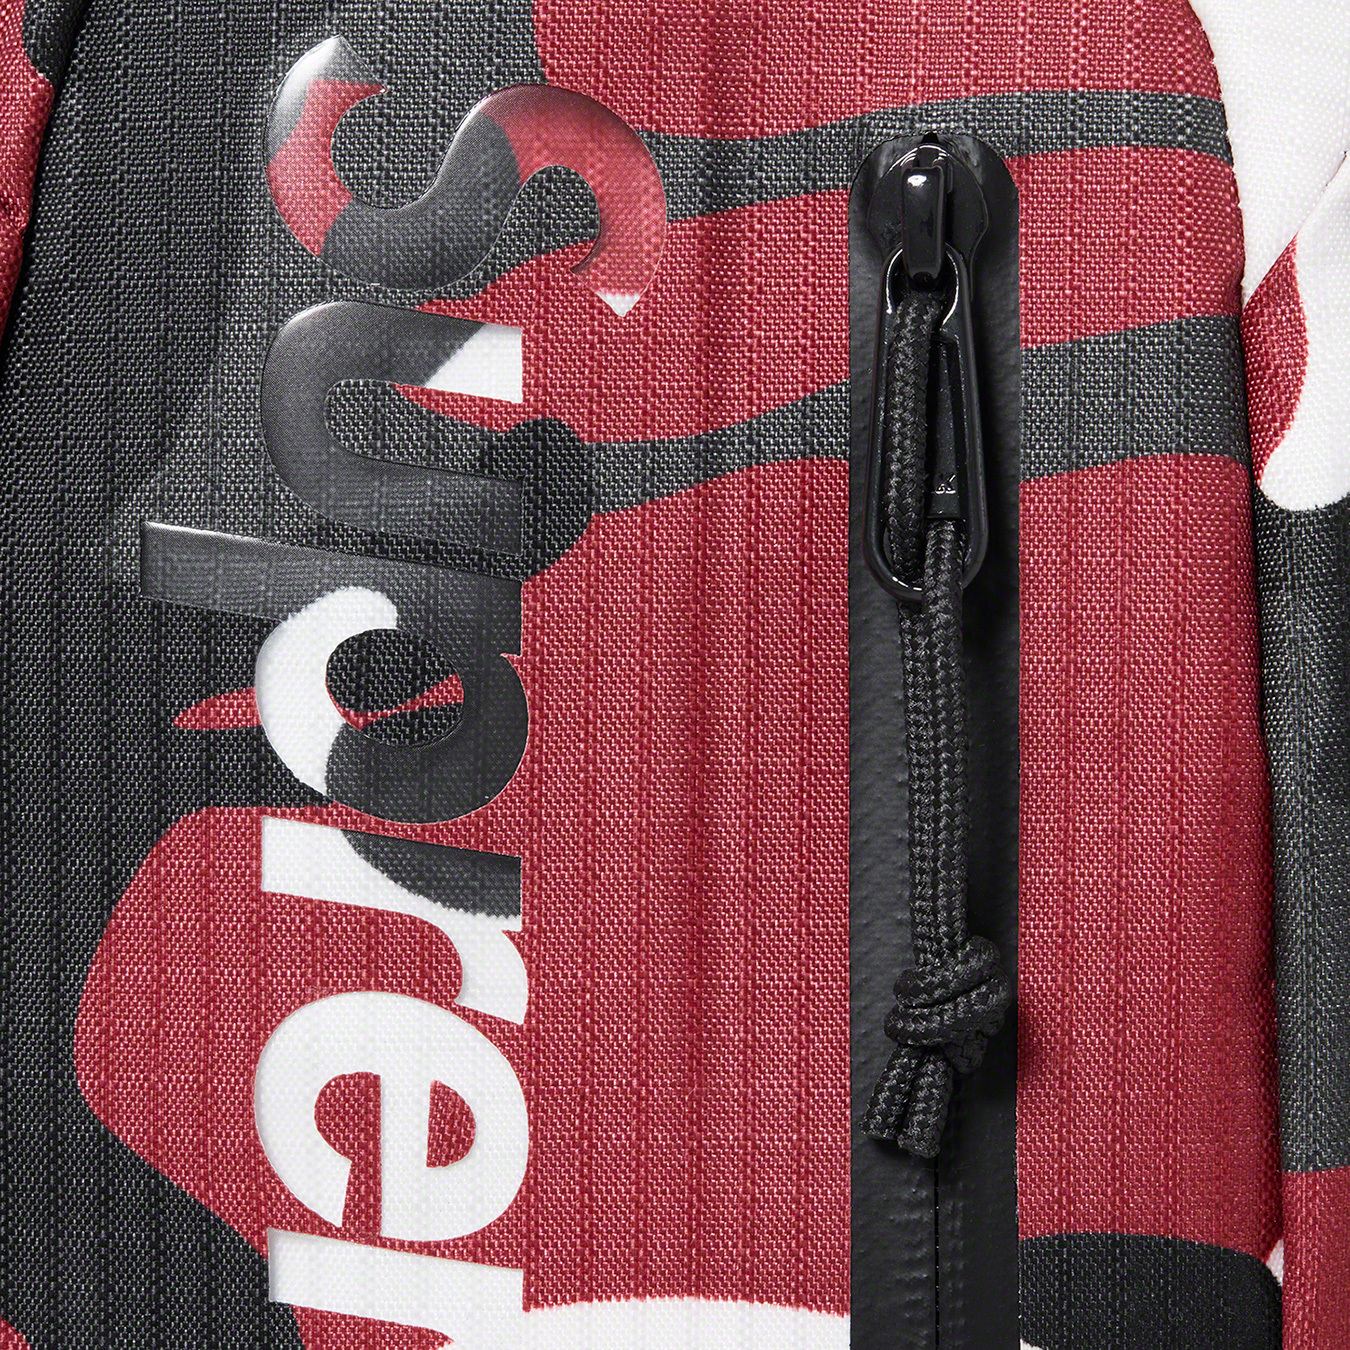 Supreme Backpack (SS21) Red Camo - SS21 - US